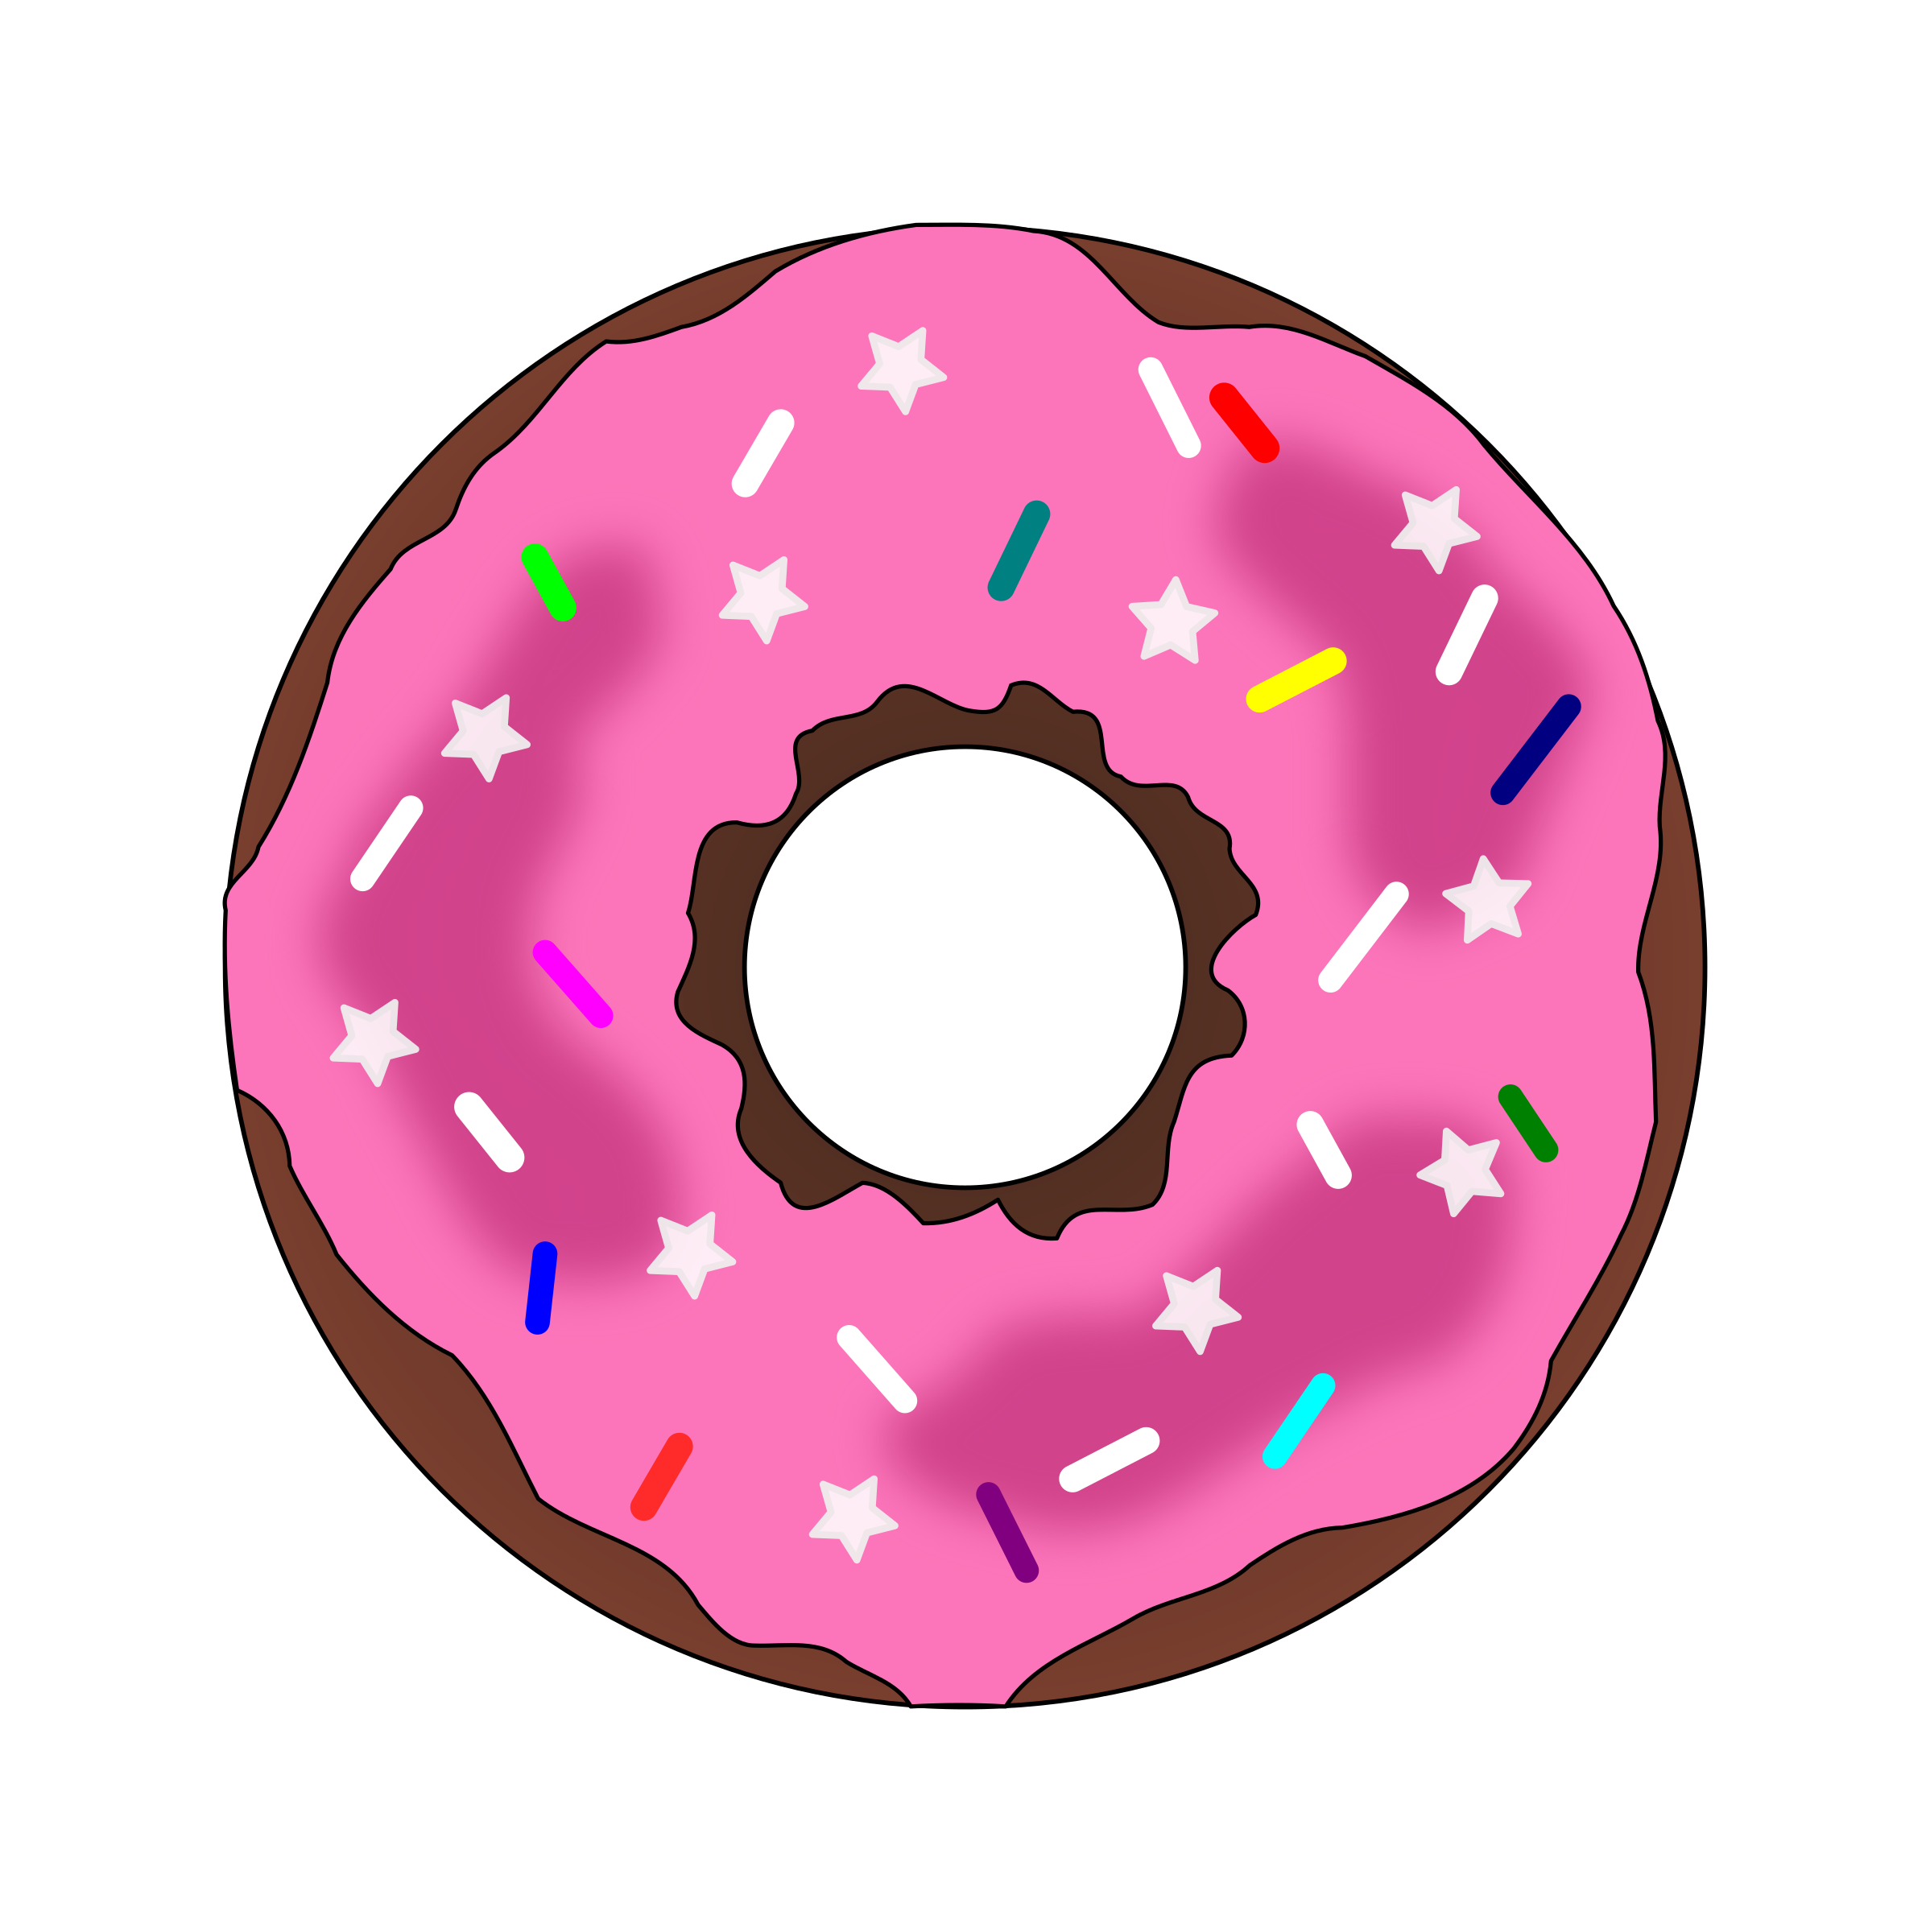 Doughnut Icing Icon Clip art Donut PNG png download 2397*2400